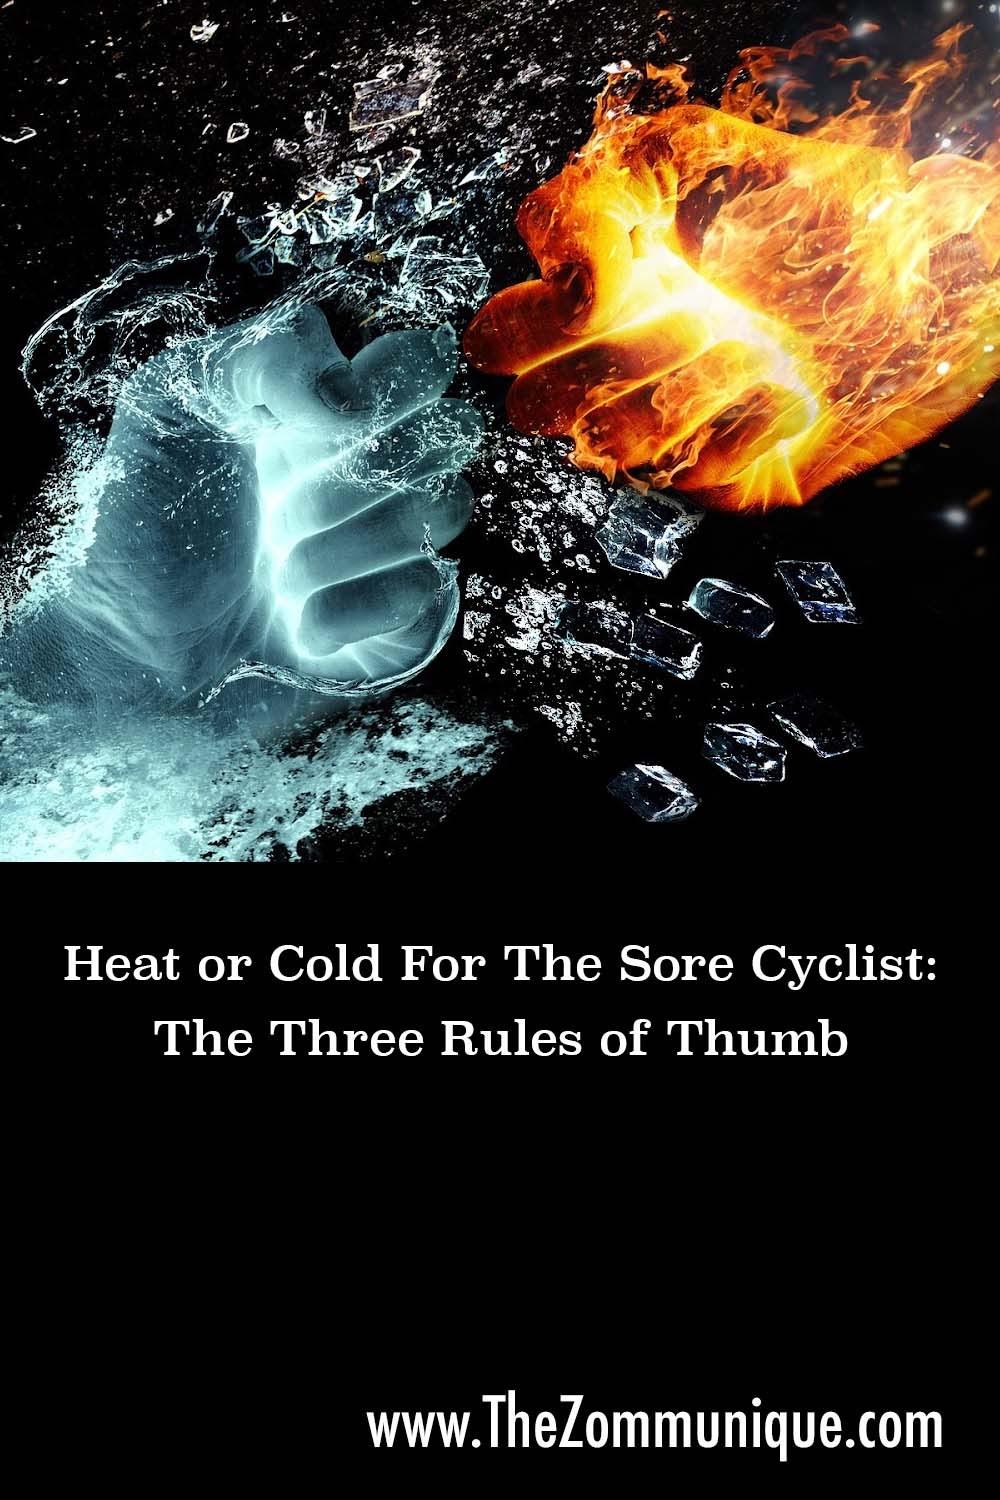 Heat or cold for the sore cyclist image